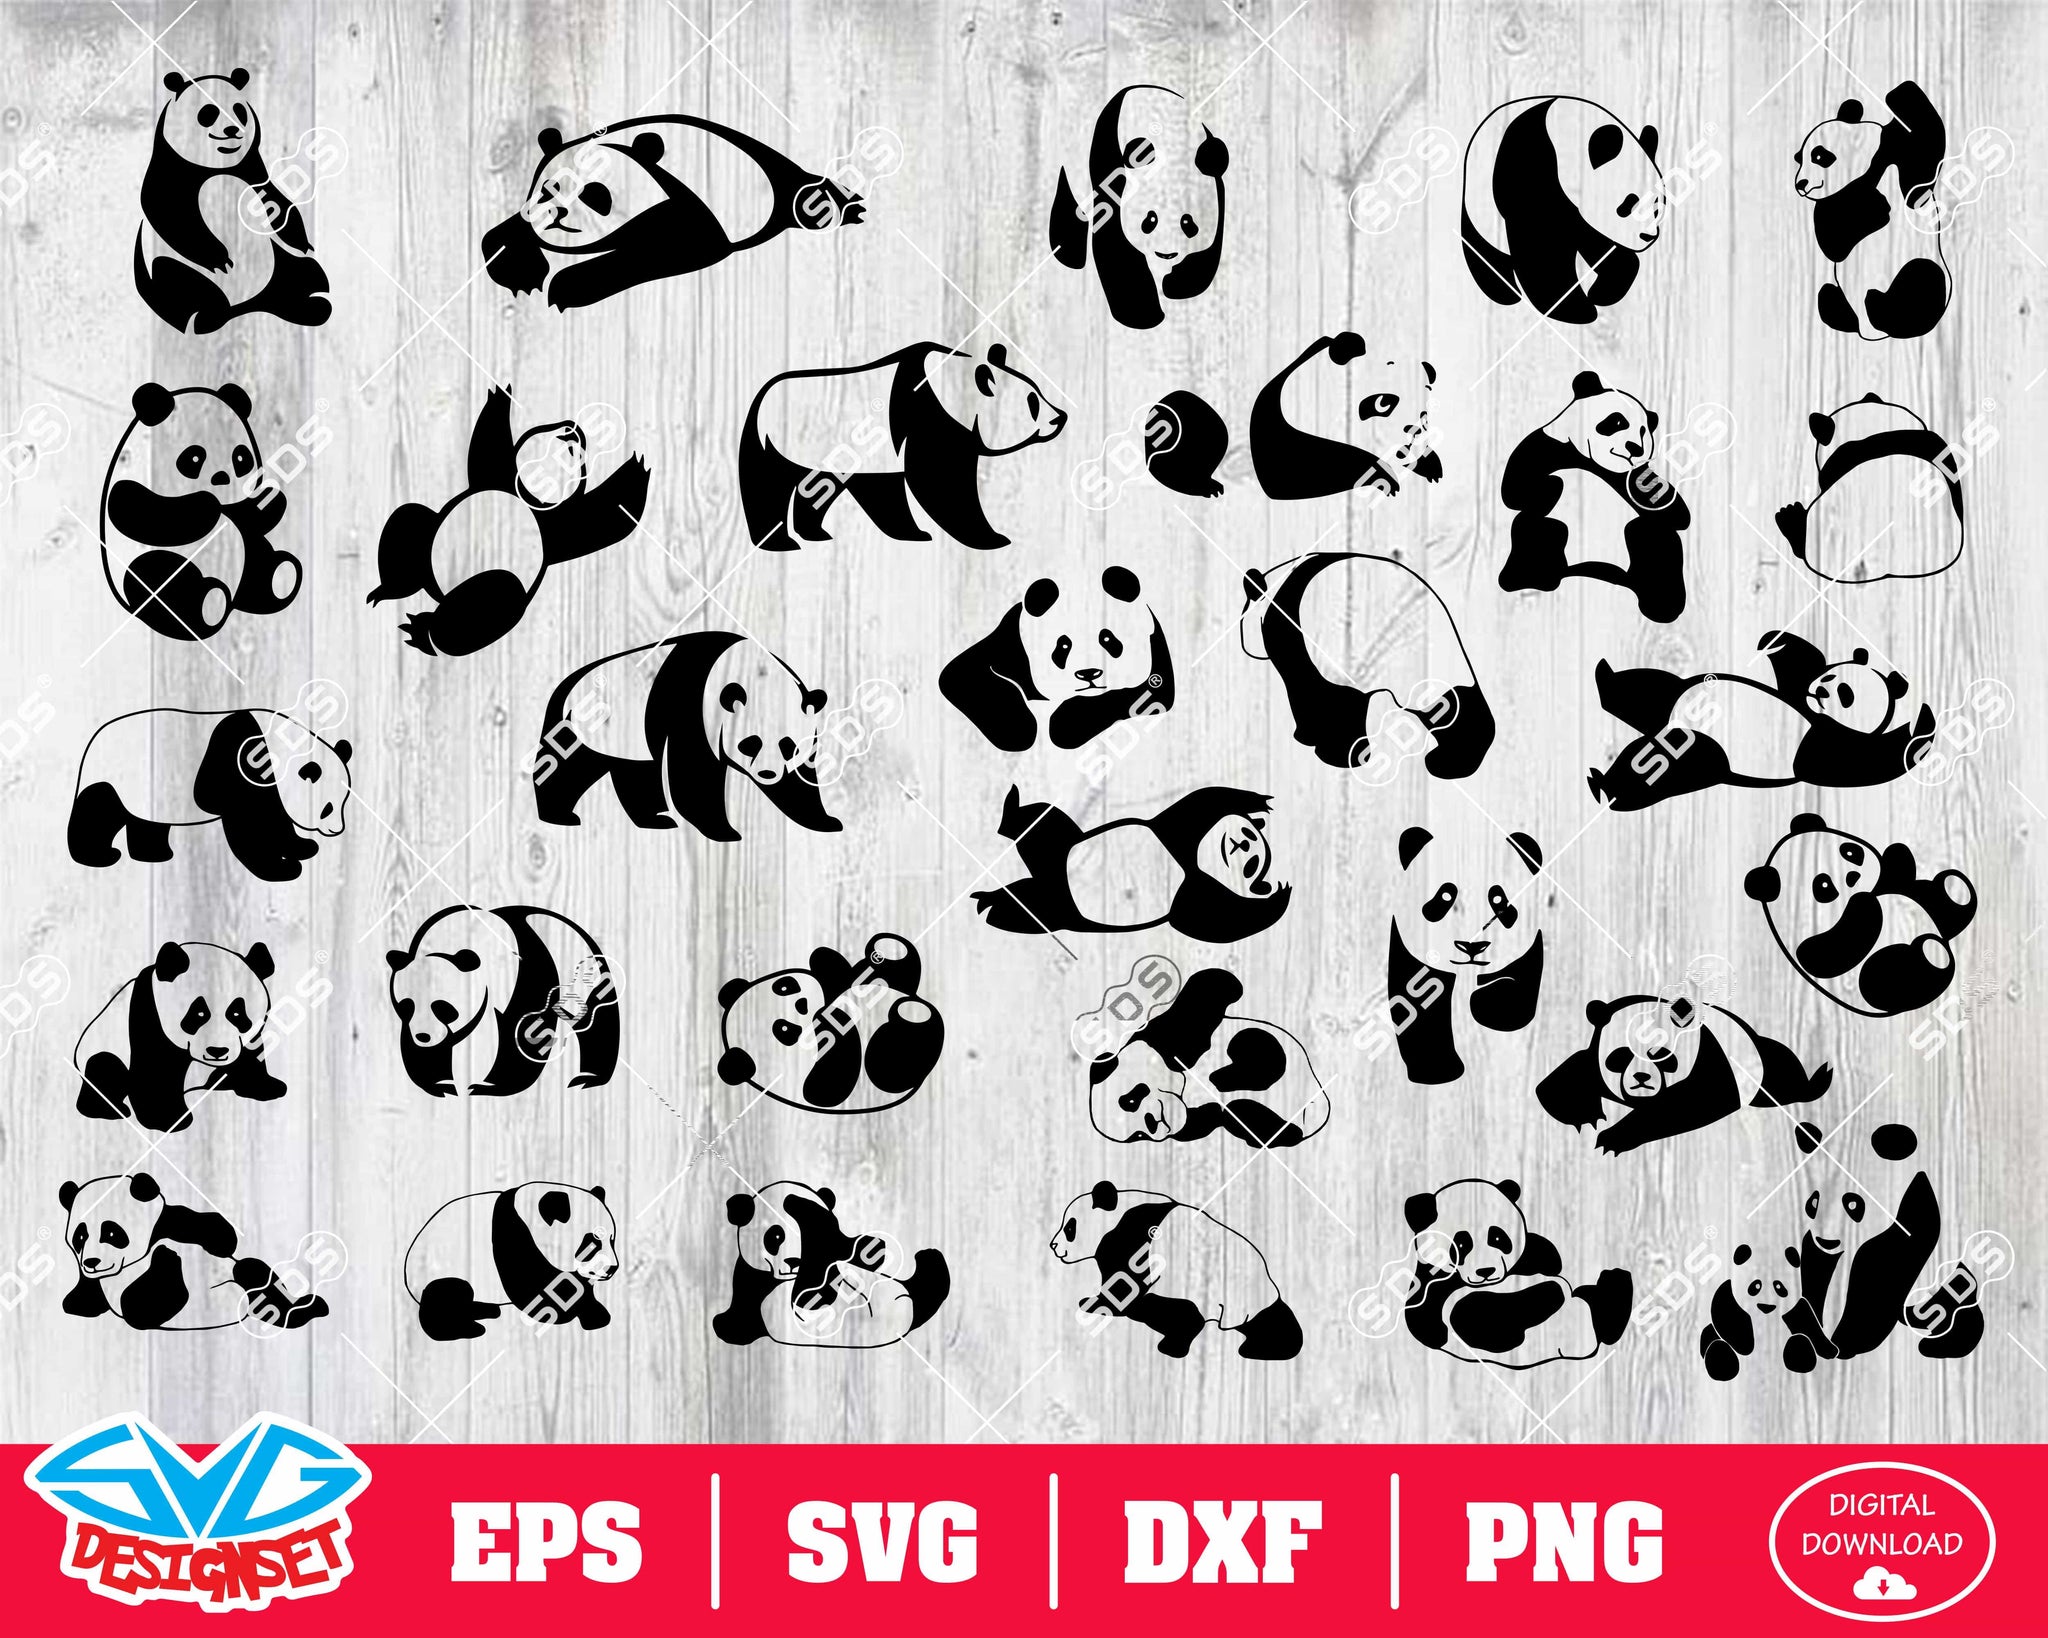 Panda Svg, Dxf, Eps, Png, Clipart, Silhouette and Cutfiles - SVGDesignSets